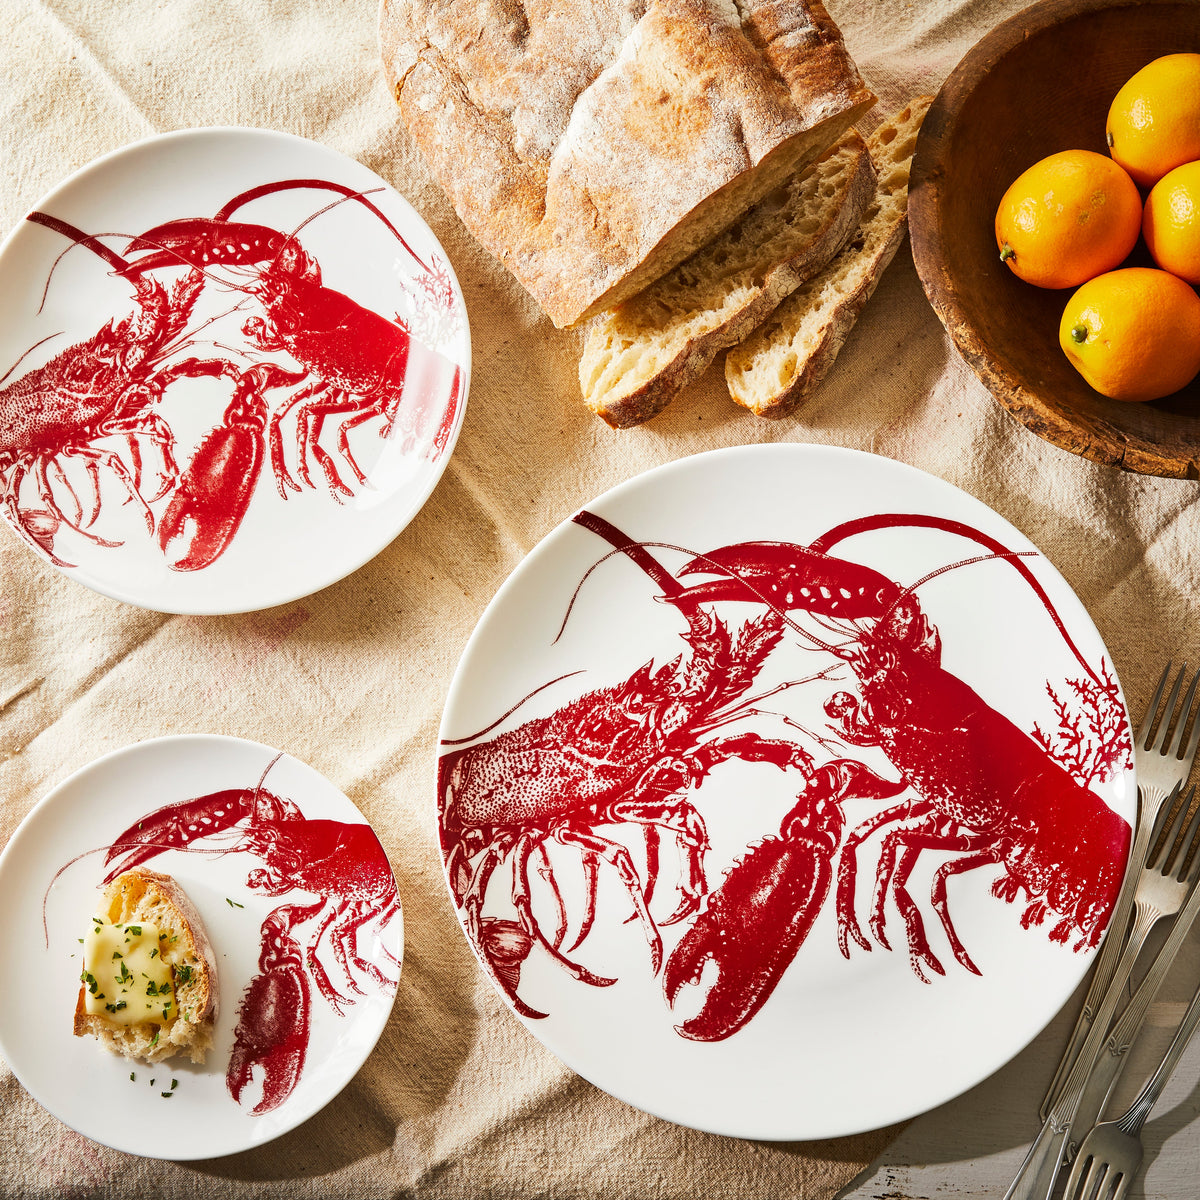 Three Lobster Coupe Dinner Plates by Caskata, crafted from premium porcelain and dishwasher and microwave safe, a loaf of bread, a wooden bowl of lemons, and silverware are arranged on a beige tablecloth.